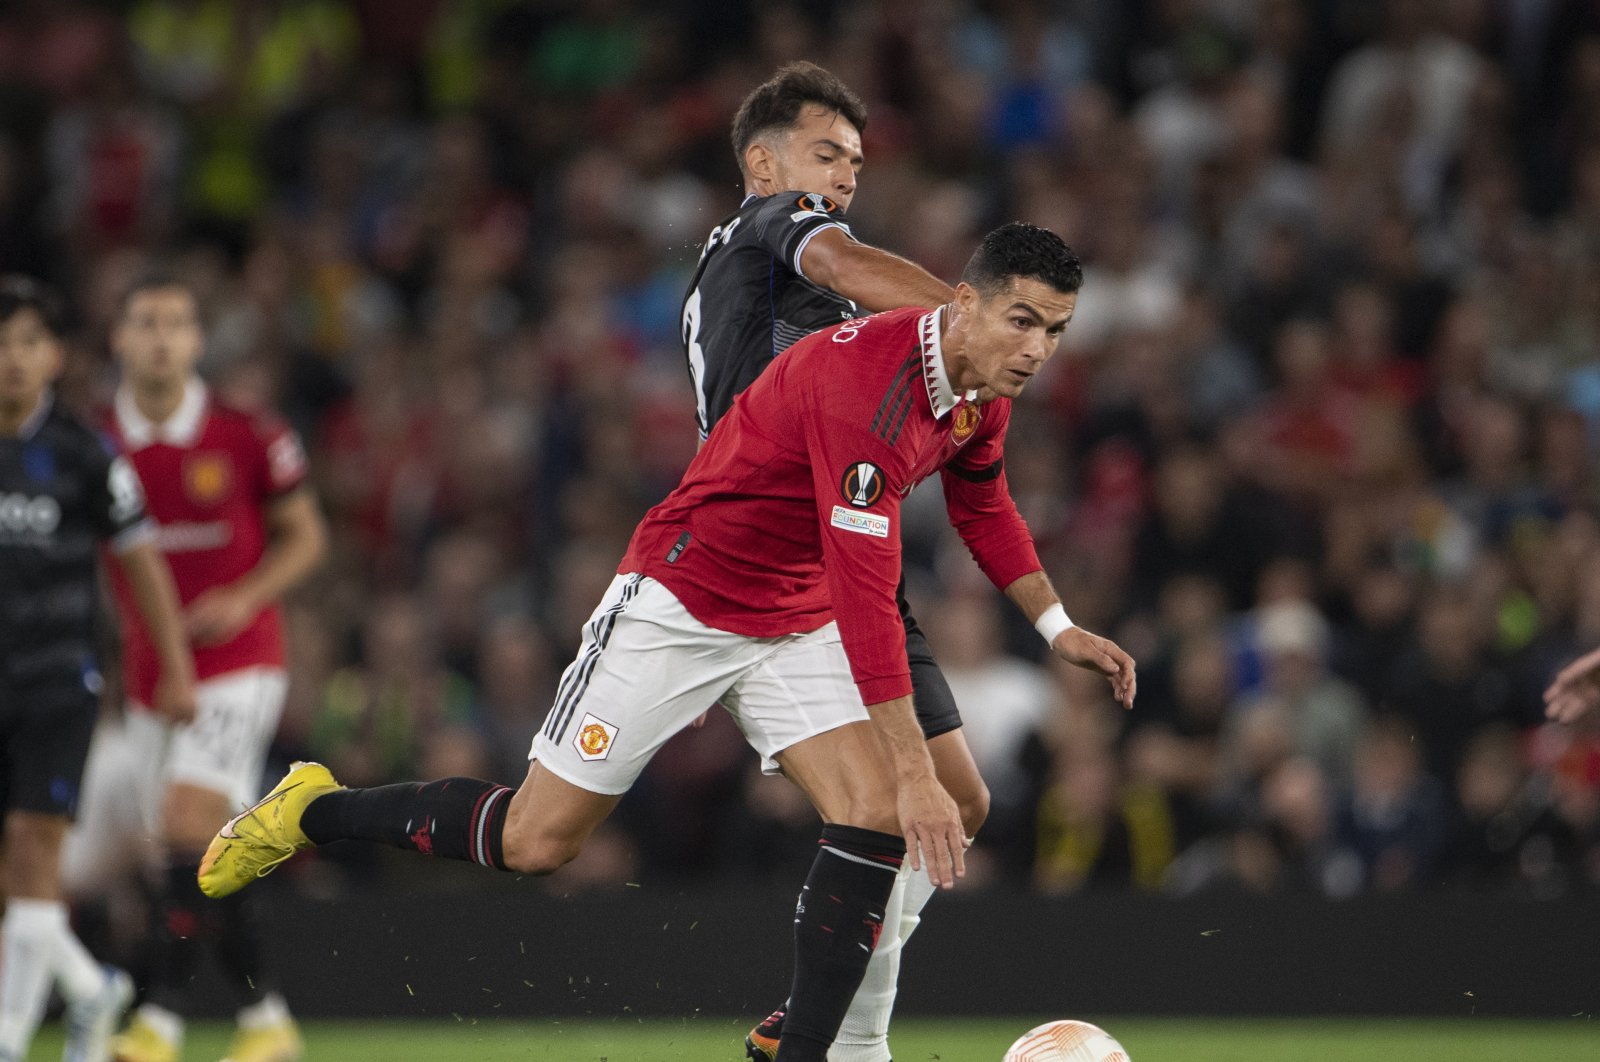 Manchester United&#039;s Cristiano Ronaldo and Real Sociedad&#039;s Martin Zubimendi in action during the UEFA Europa League Group E match between Manchester United and Real Sociedad at Old Trafford, Manchester, United Kingdom, Sept. 8, 2022. (Getty Images Photo)